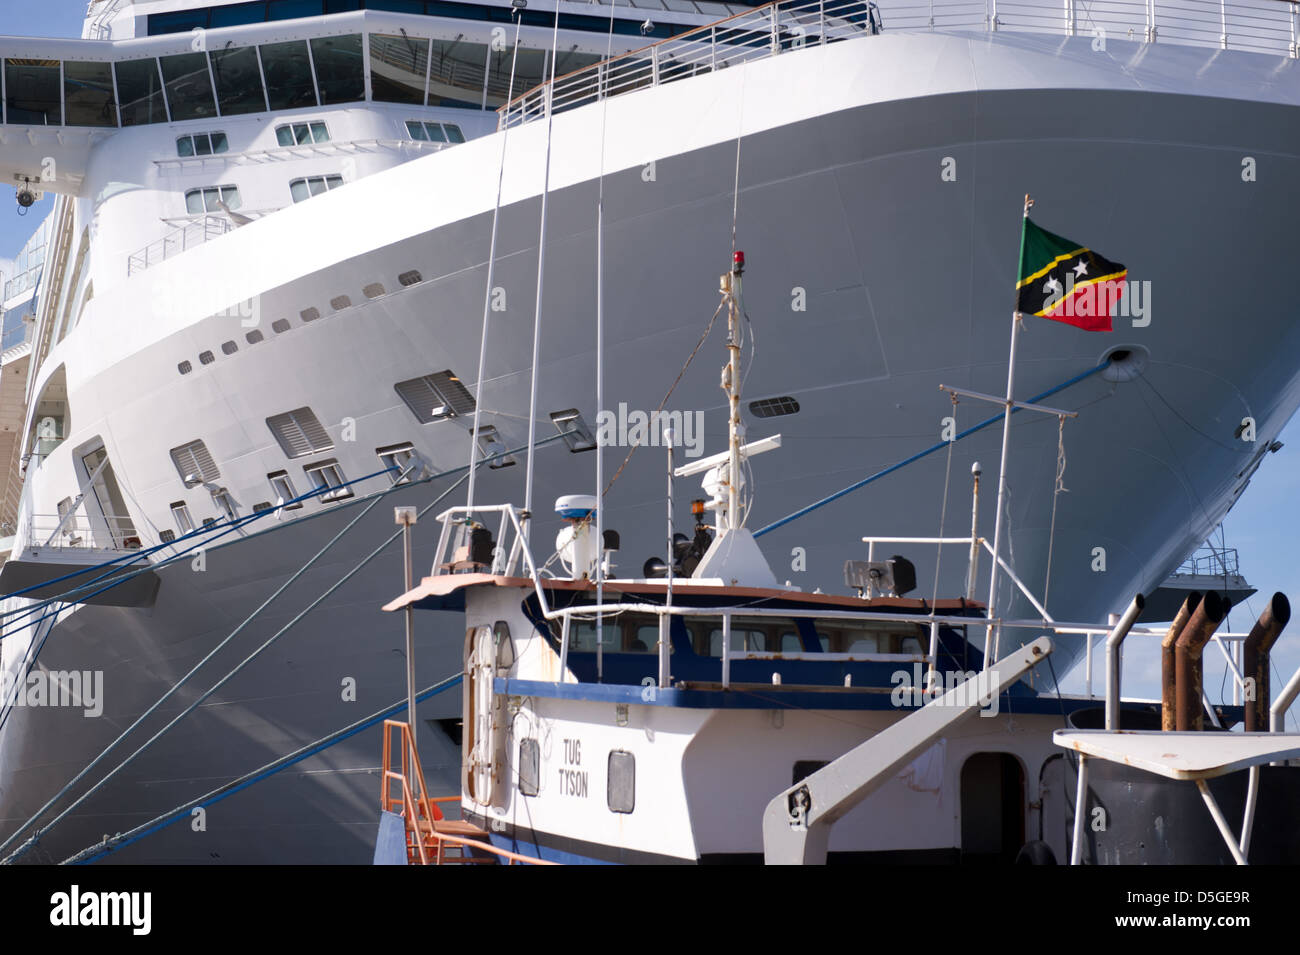 A huge cruise ship docked behind a tug in Basseterre, St Kitts, Caribbean region Stock Photo